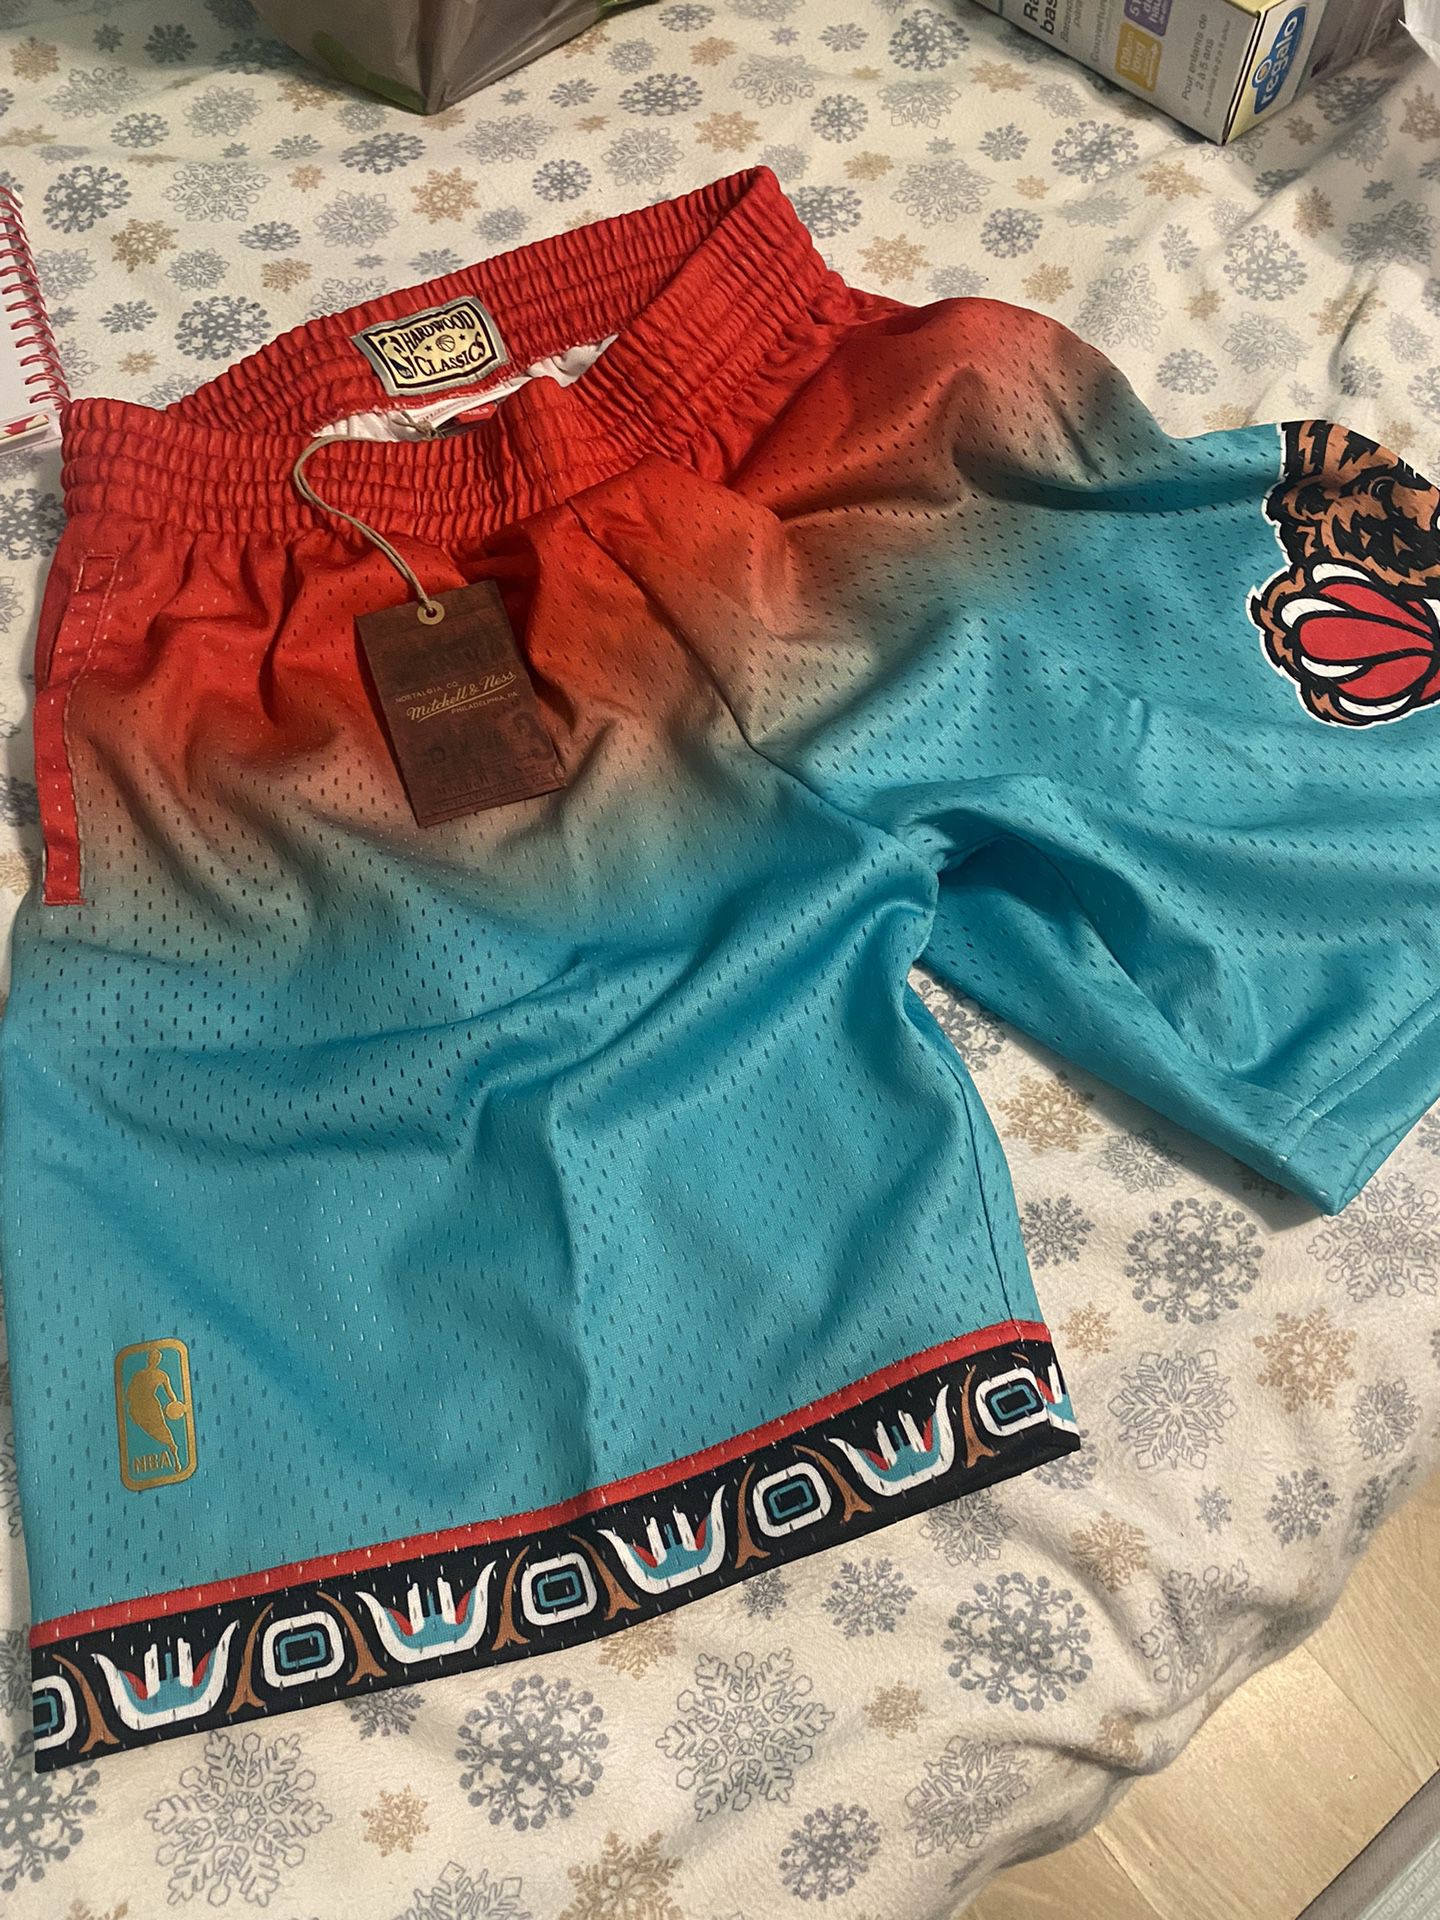 Mitchell & Ness Vancouver Grizzlies NBA Swingman Shorts Men's Large for  Sale in Los Angeles, CA - OfferUp